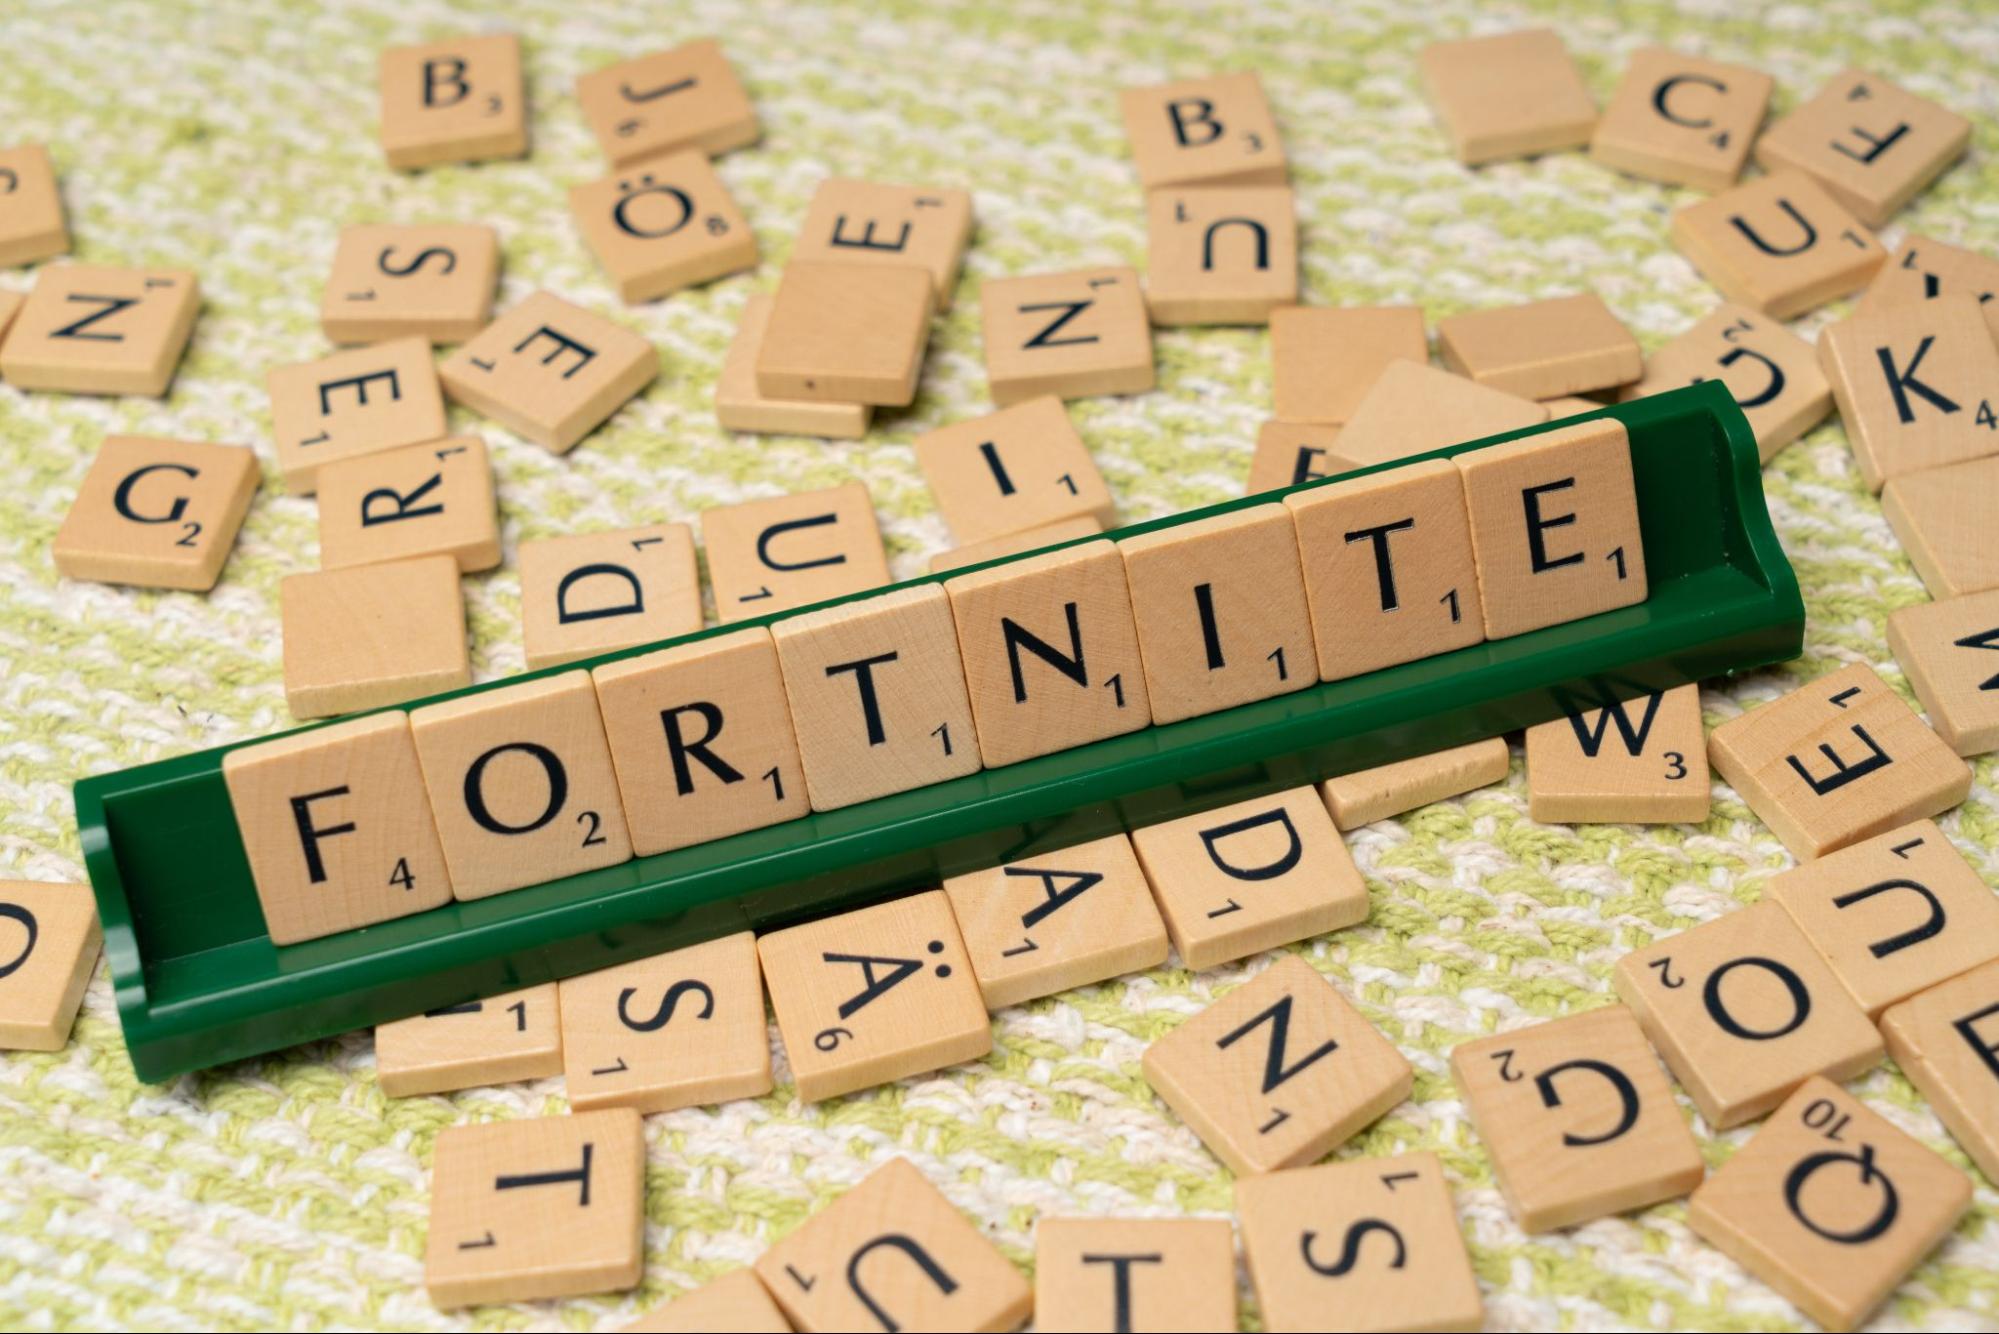 Fortnite’s popularity can attract the attention of cyber criminals, so taking steps to protect your data is essential.